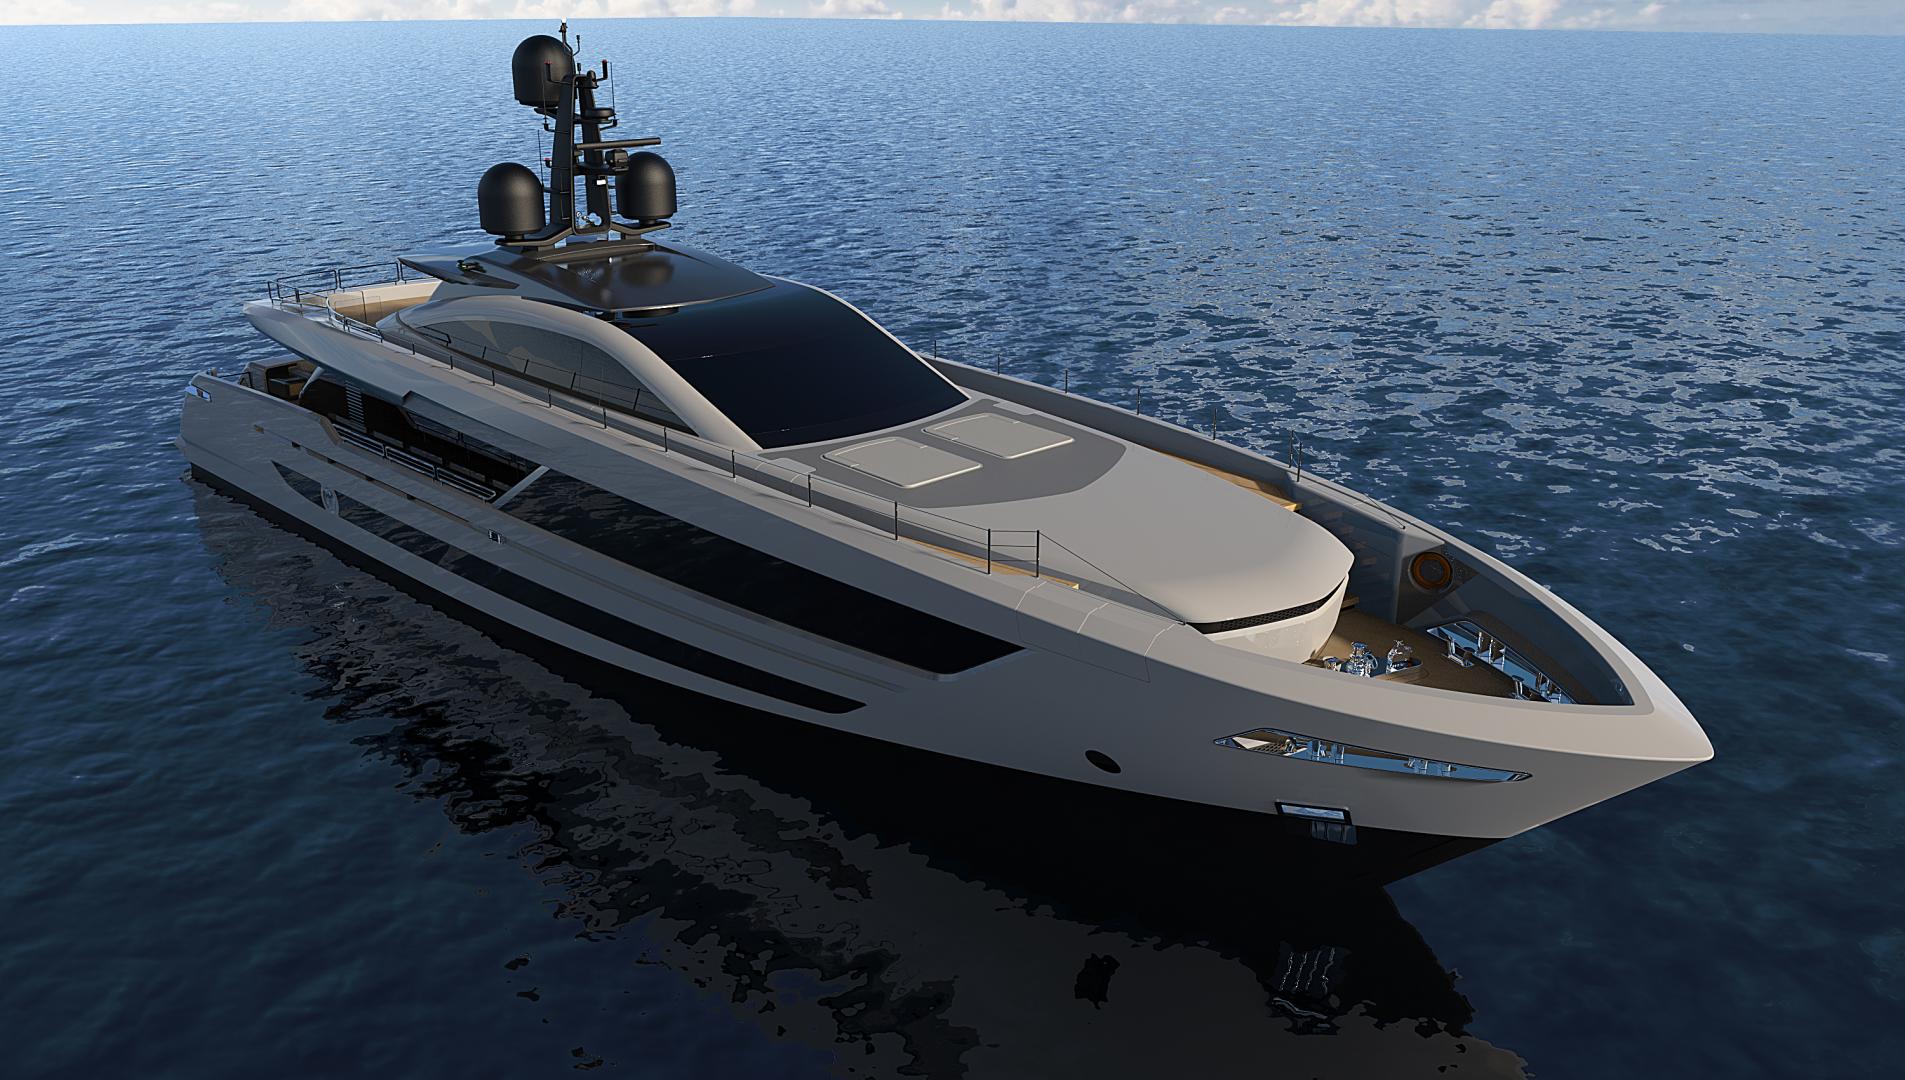 Baglietto unveils for the first time its new Superfast42 project